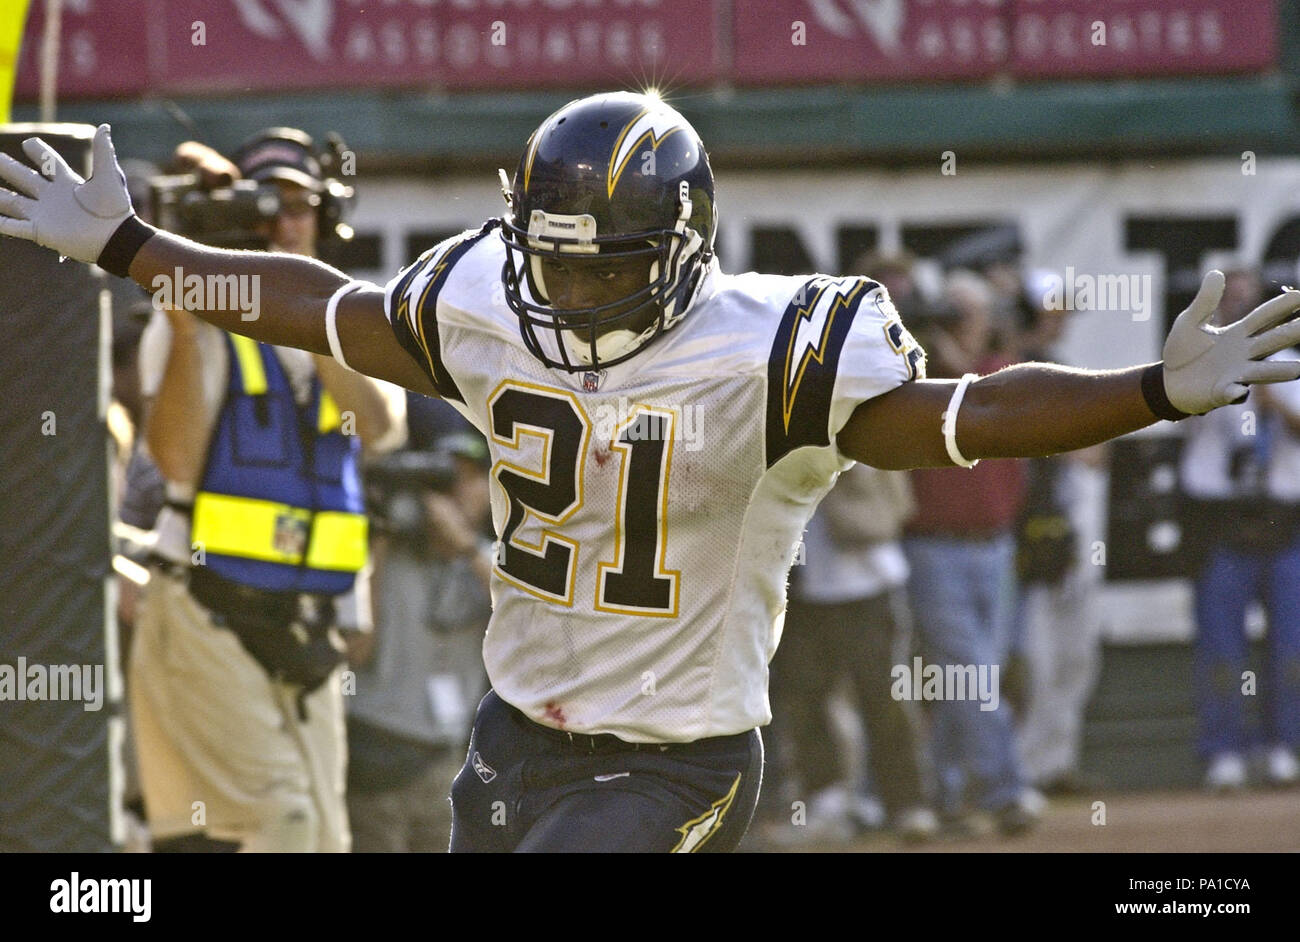 Oakland, California, USA. 20th Oct, 2002. San Diego Chargers running back  LaDainian Tomlinson (21) on Sunday, October 20, 2002, in Oakland,  California. The chargers defeated the Raiders 27-21 in an overtime game.